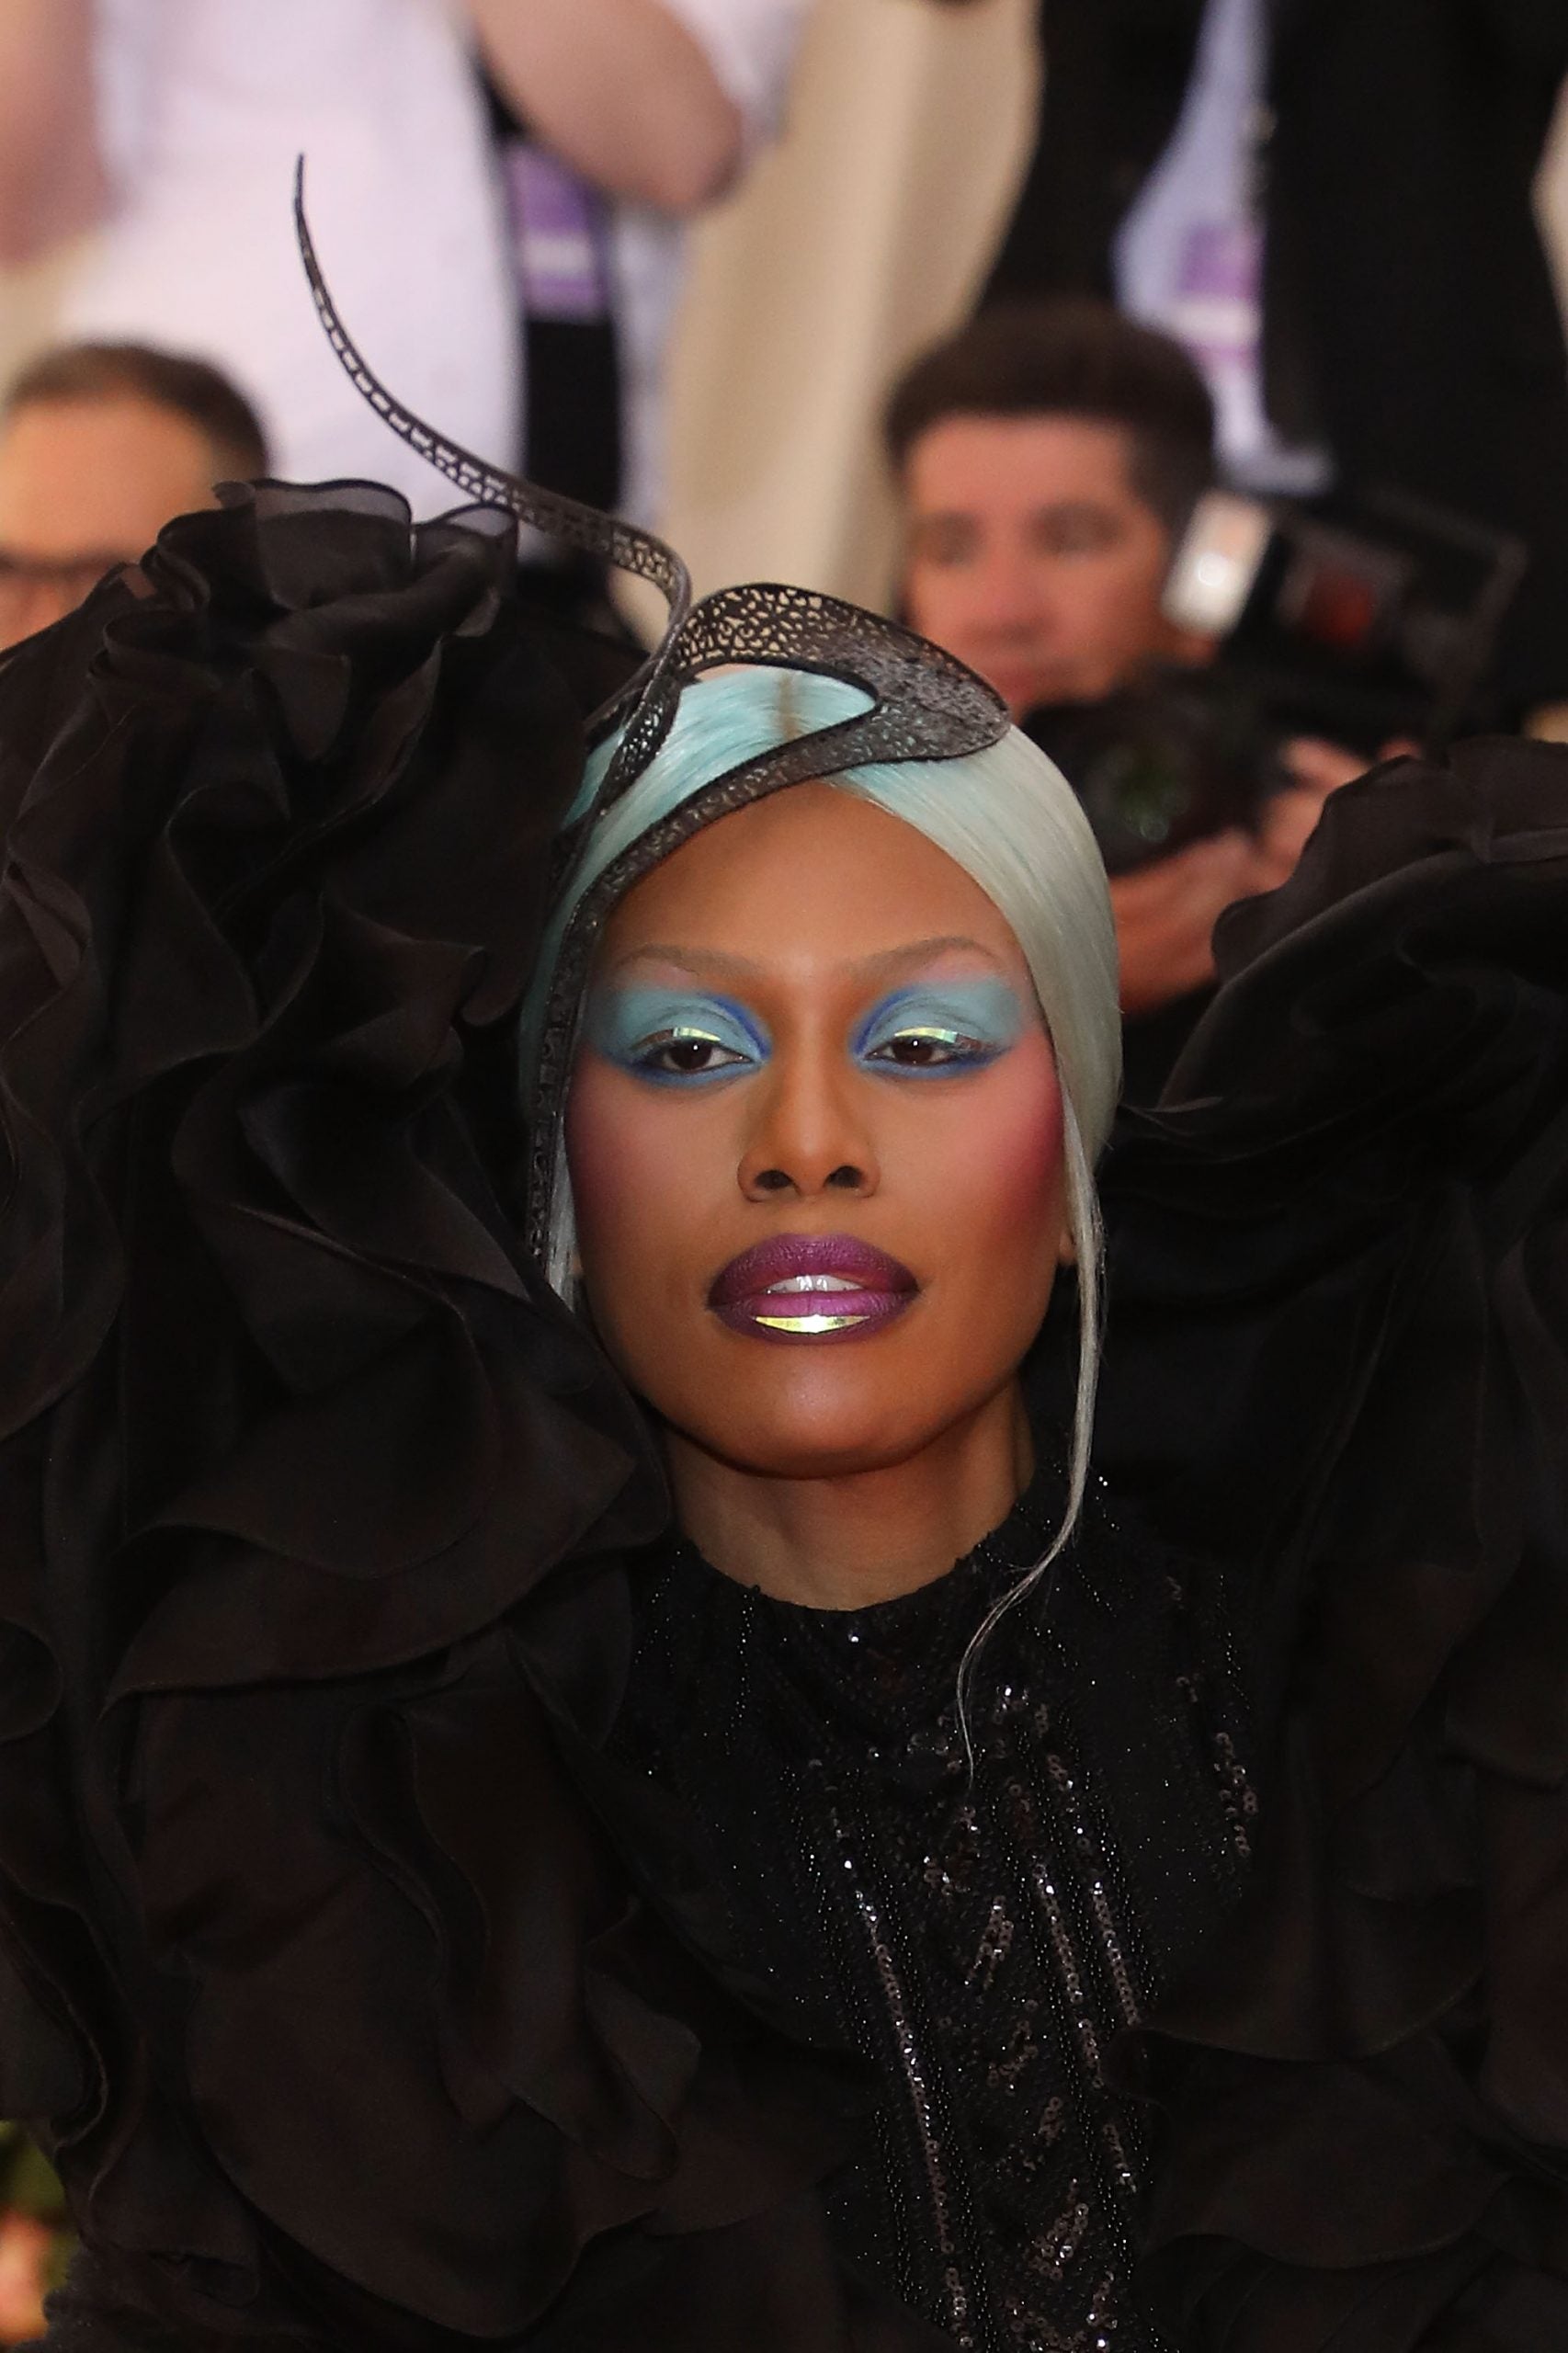 The Met Gala Might Be Postponed, But These Past Beauty Moments Live On